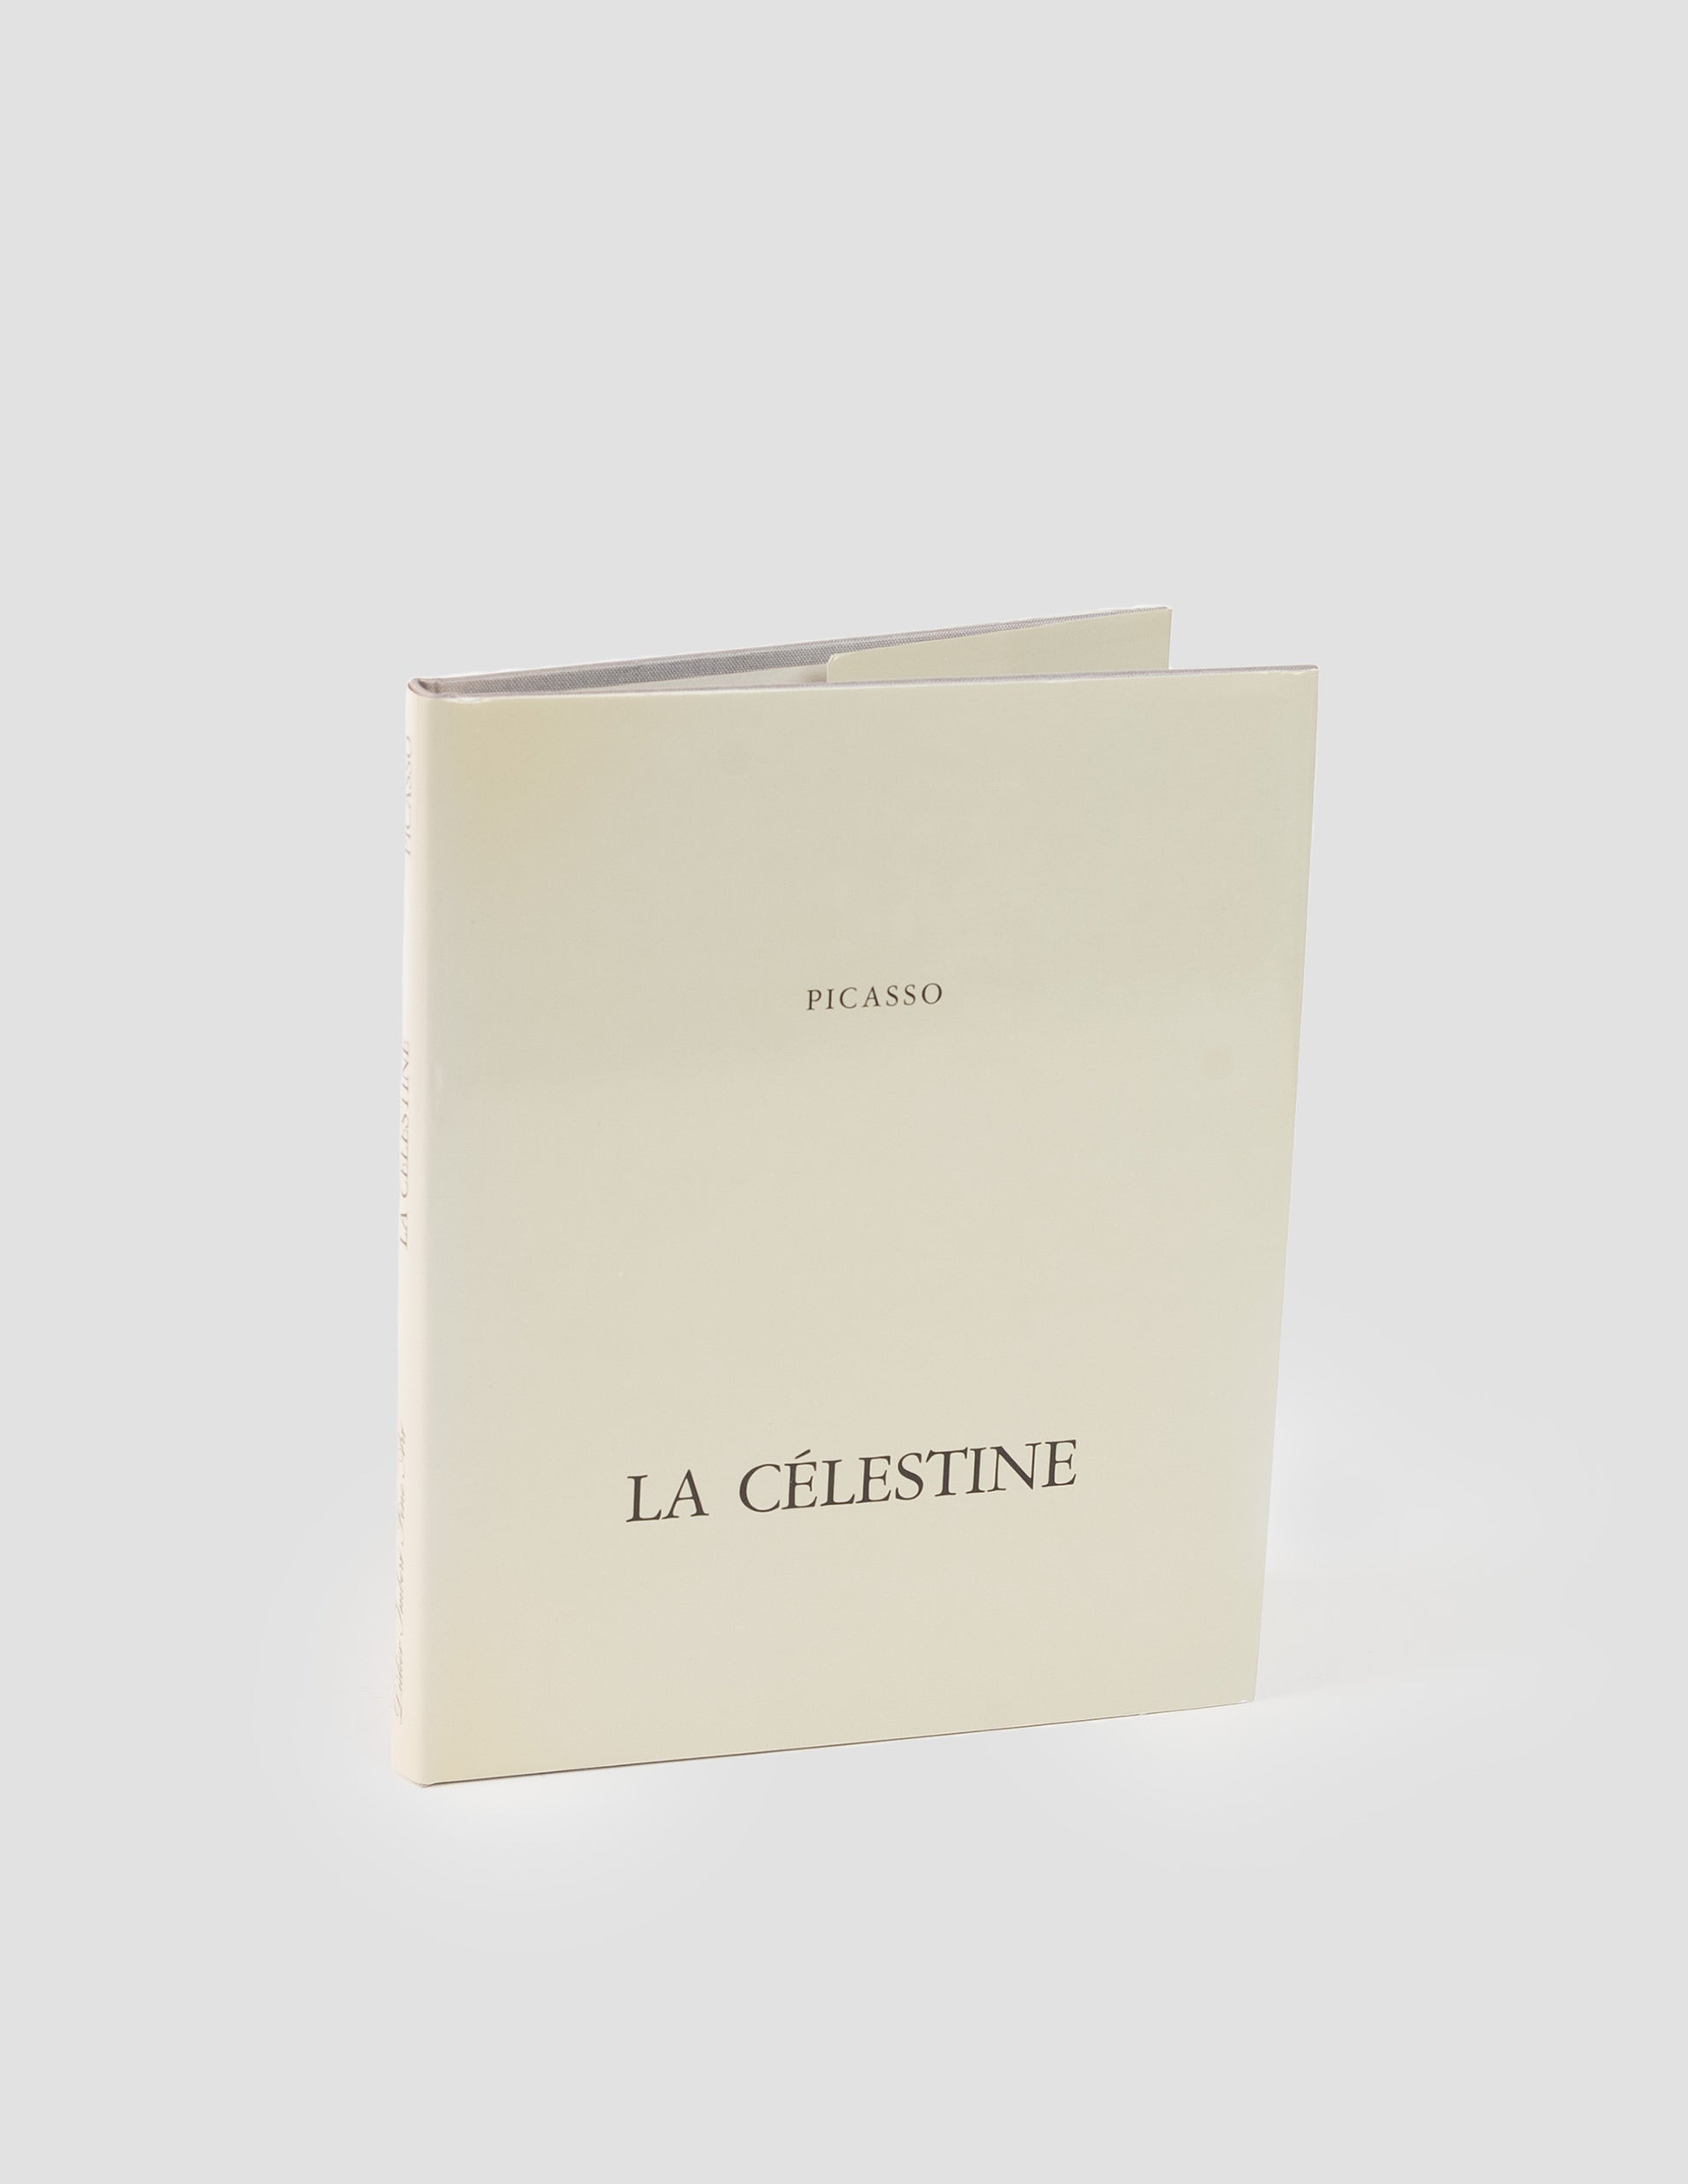 Picasso La Célestine Hardcover Exposition Program with Personal Invitation from 1988